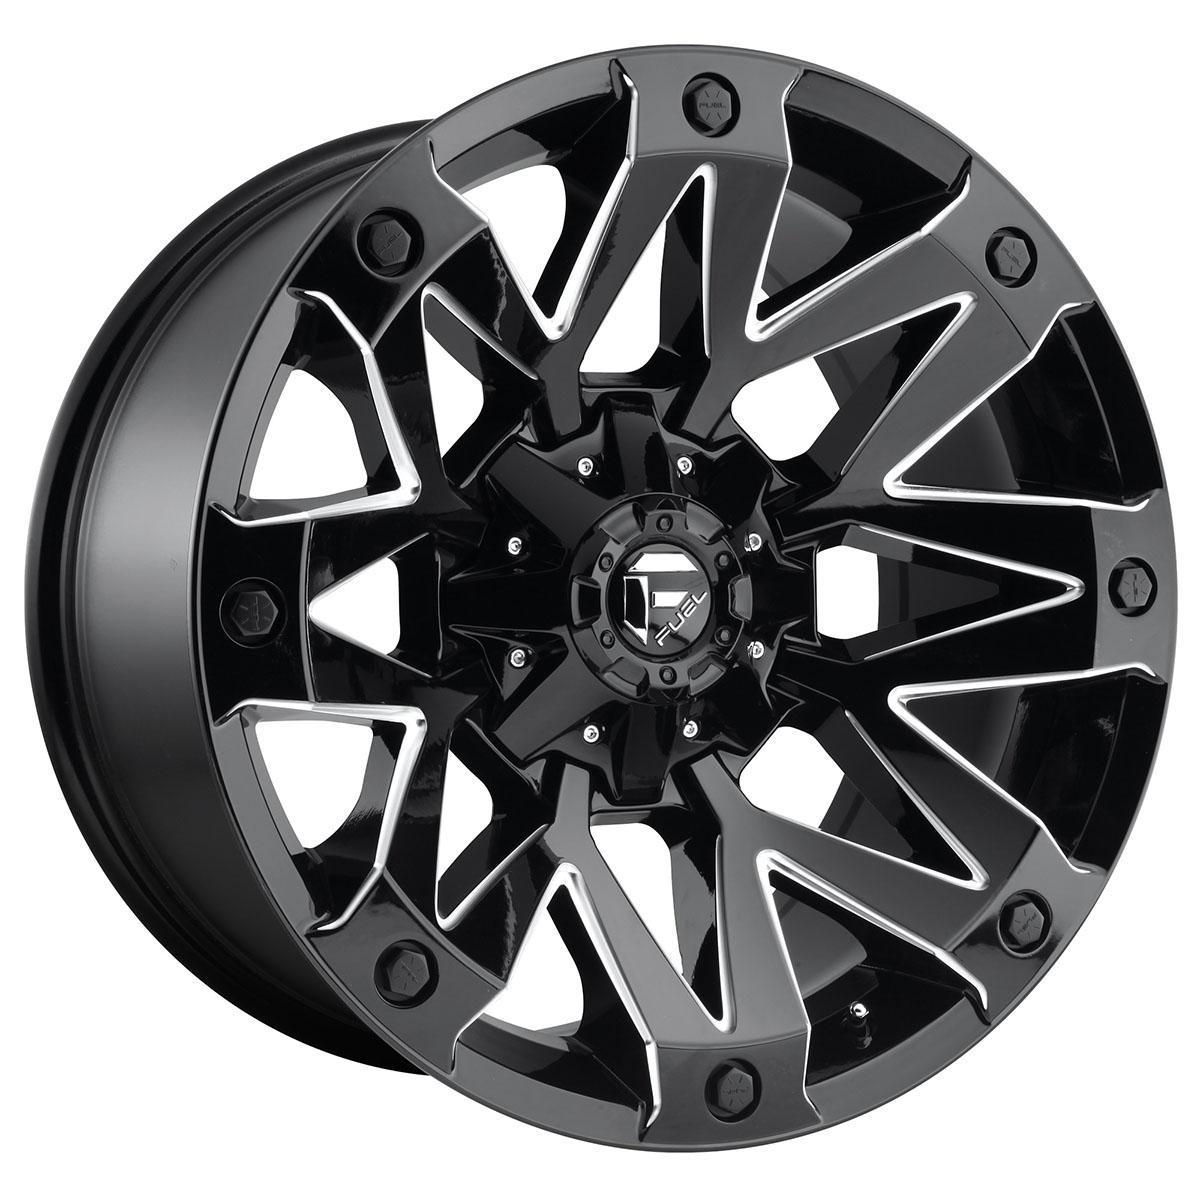 Fuel Off-Road Wheels D555 Gloss Black Milled 17 inch + OHTSU AT4000 SO - 235/65/17